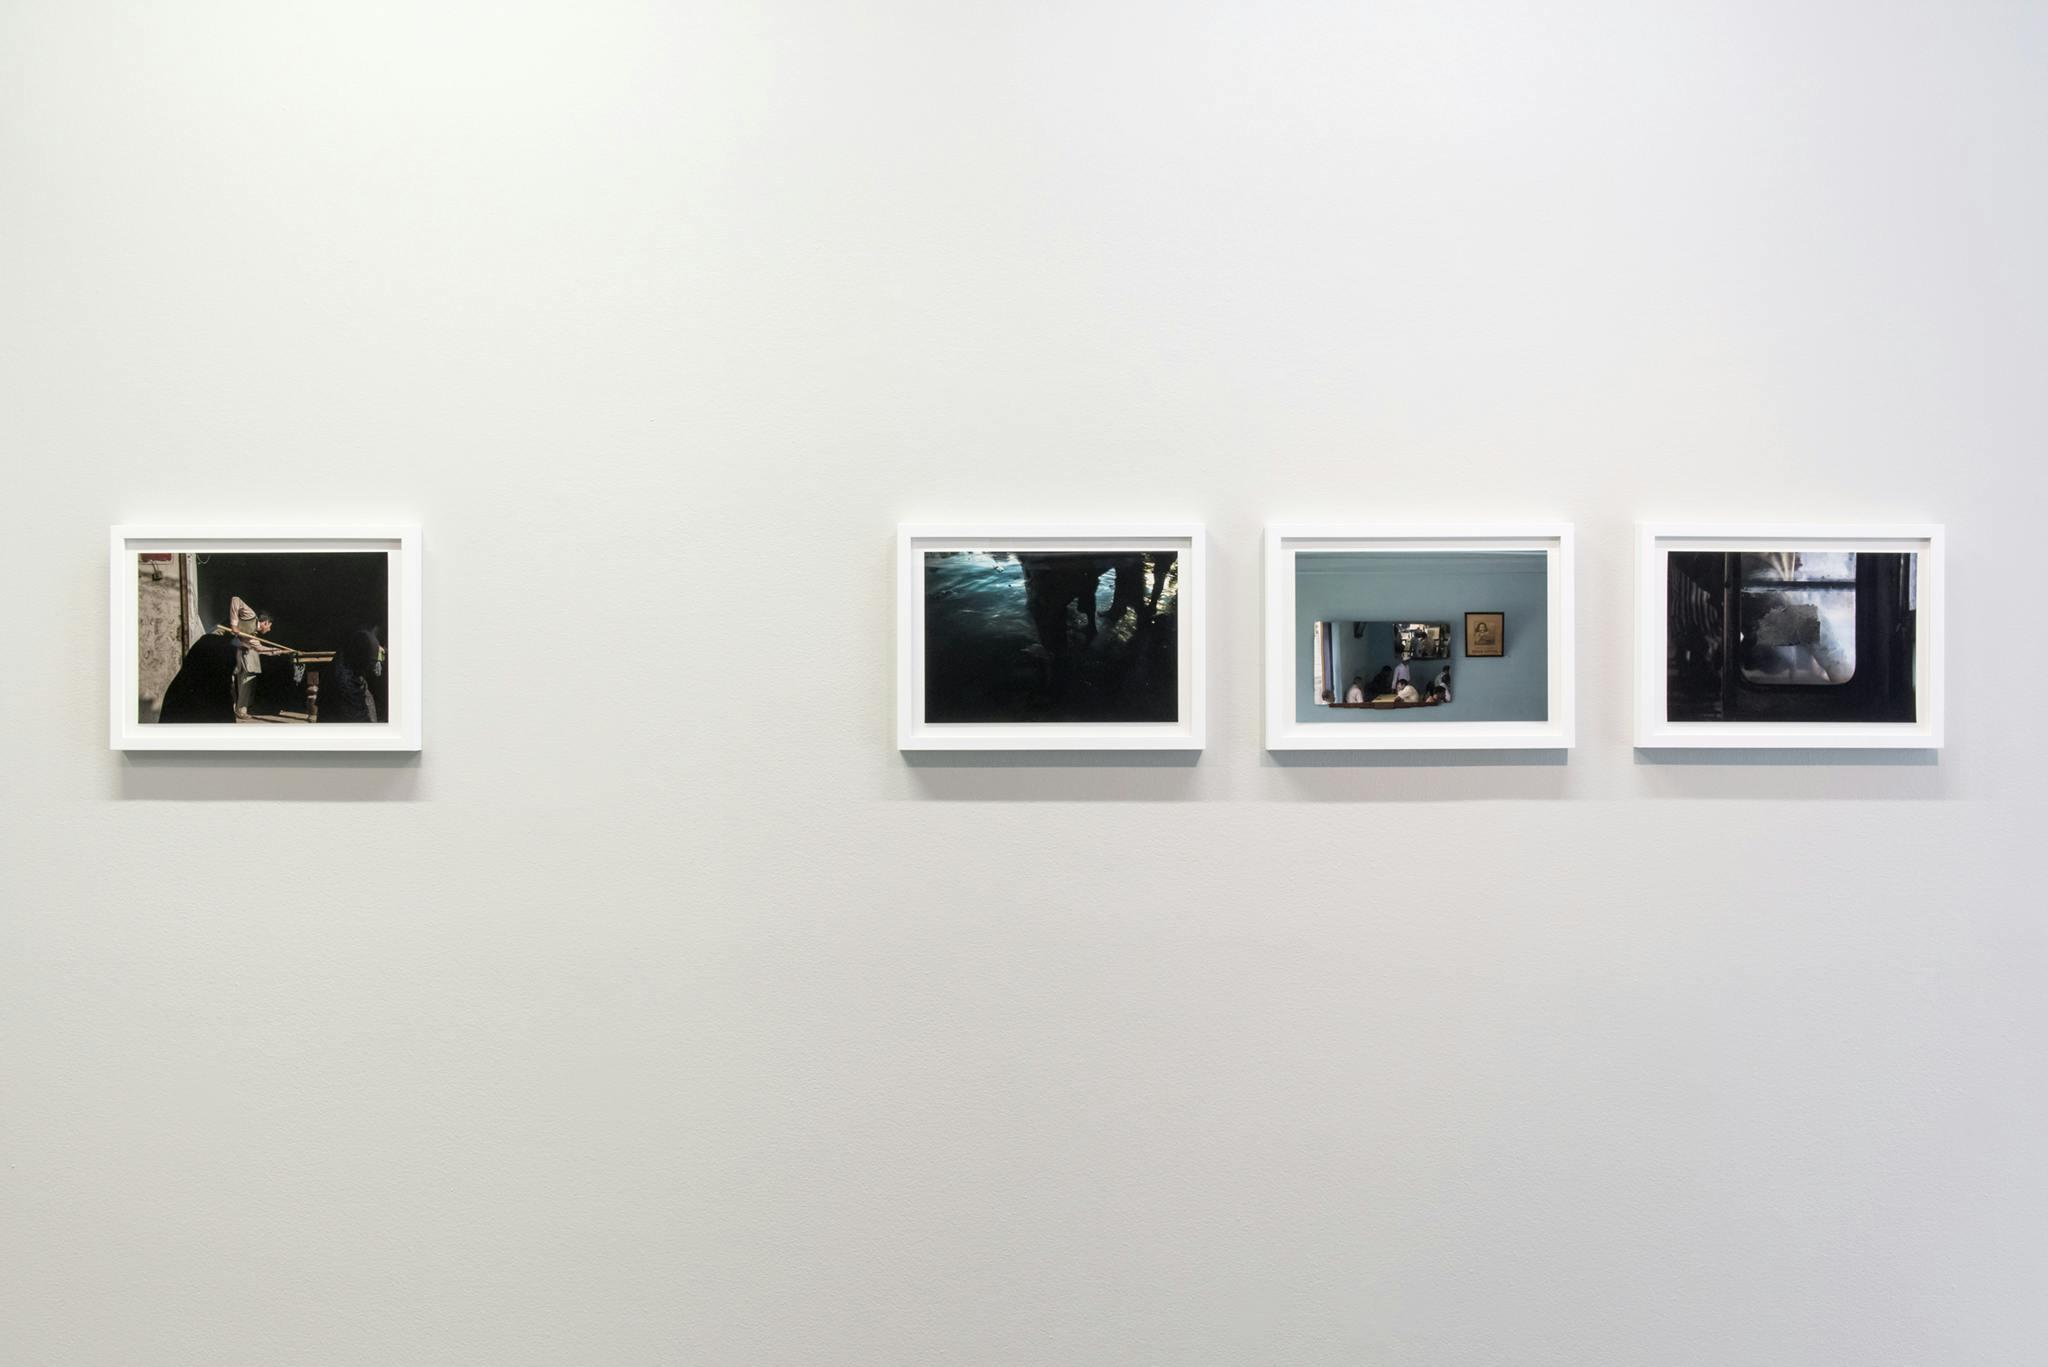 Four framed photographs hang horizontally on the wall of the gallery. Three photographs are grouped together on the right, the fourth sits alone on the left. The frames of the photographs are white.